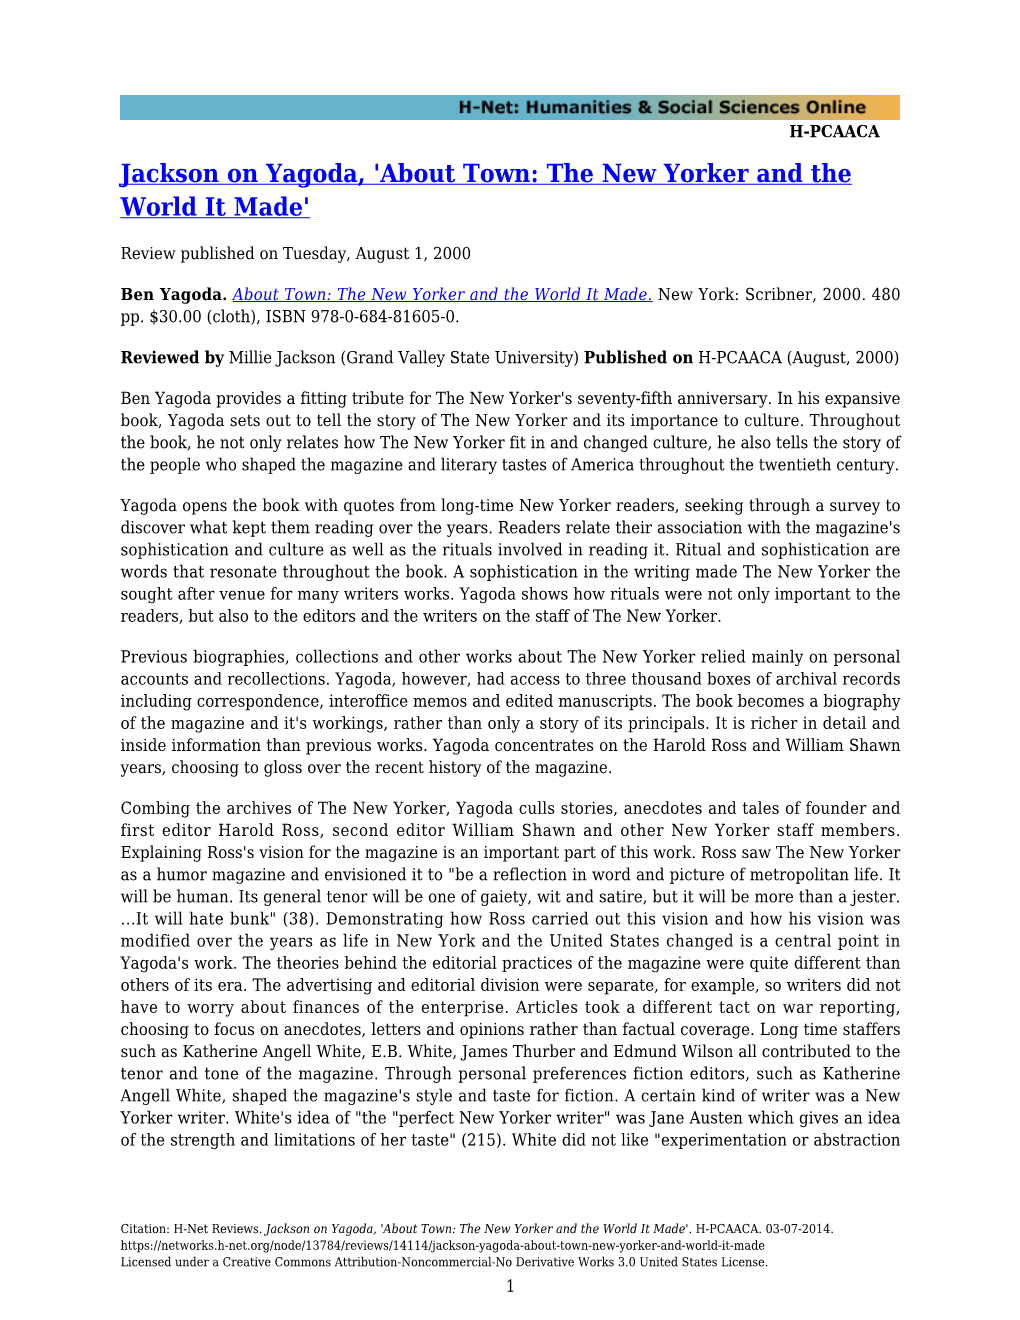 Jackson on Yagoda, 'About Town: the New Yorker and the World It Made'